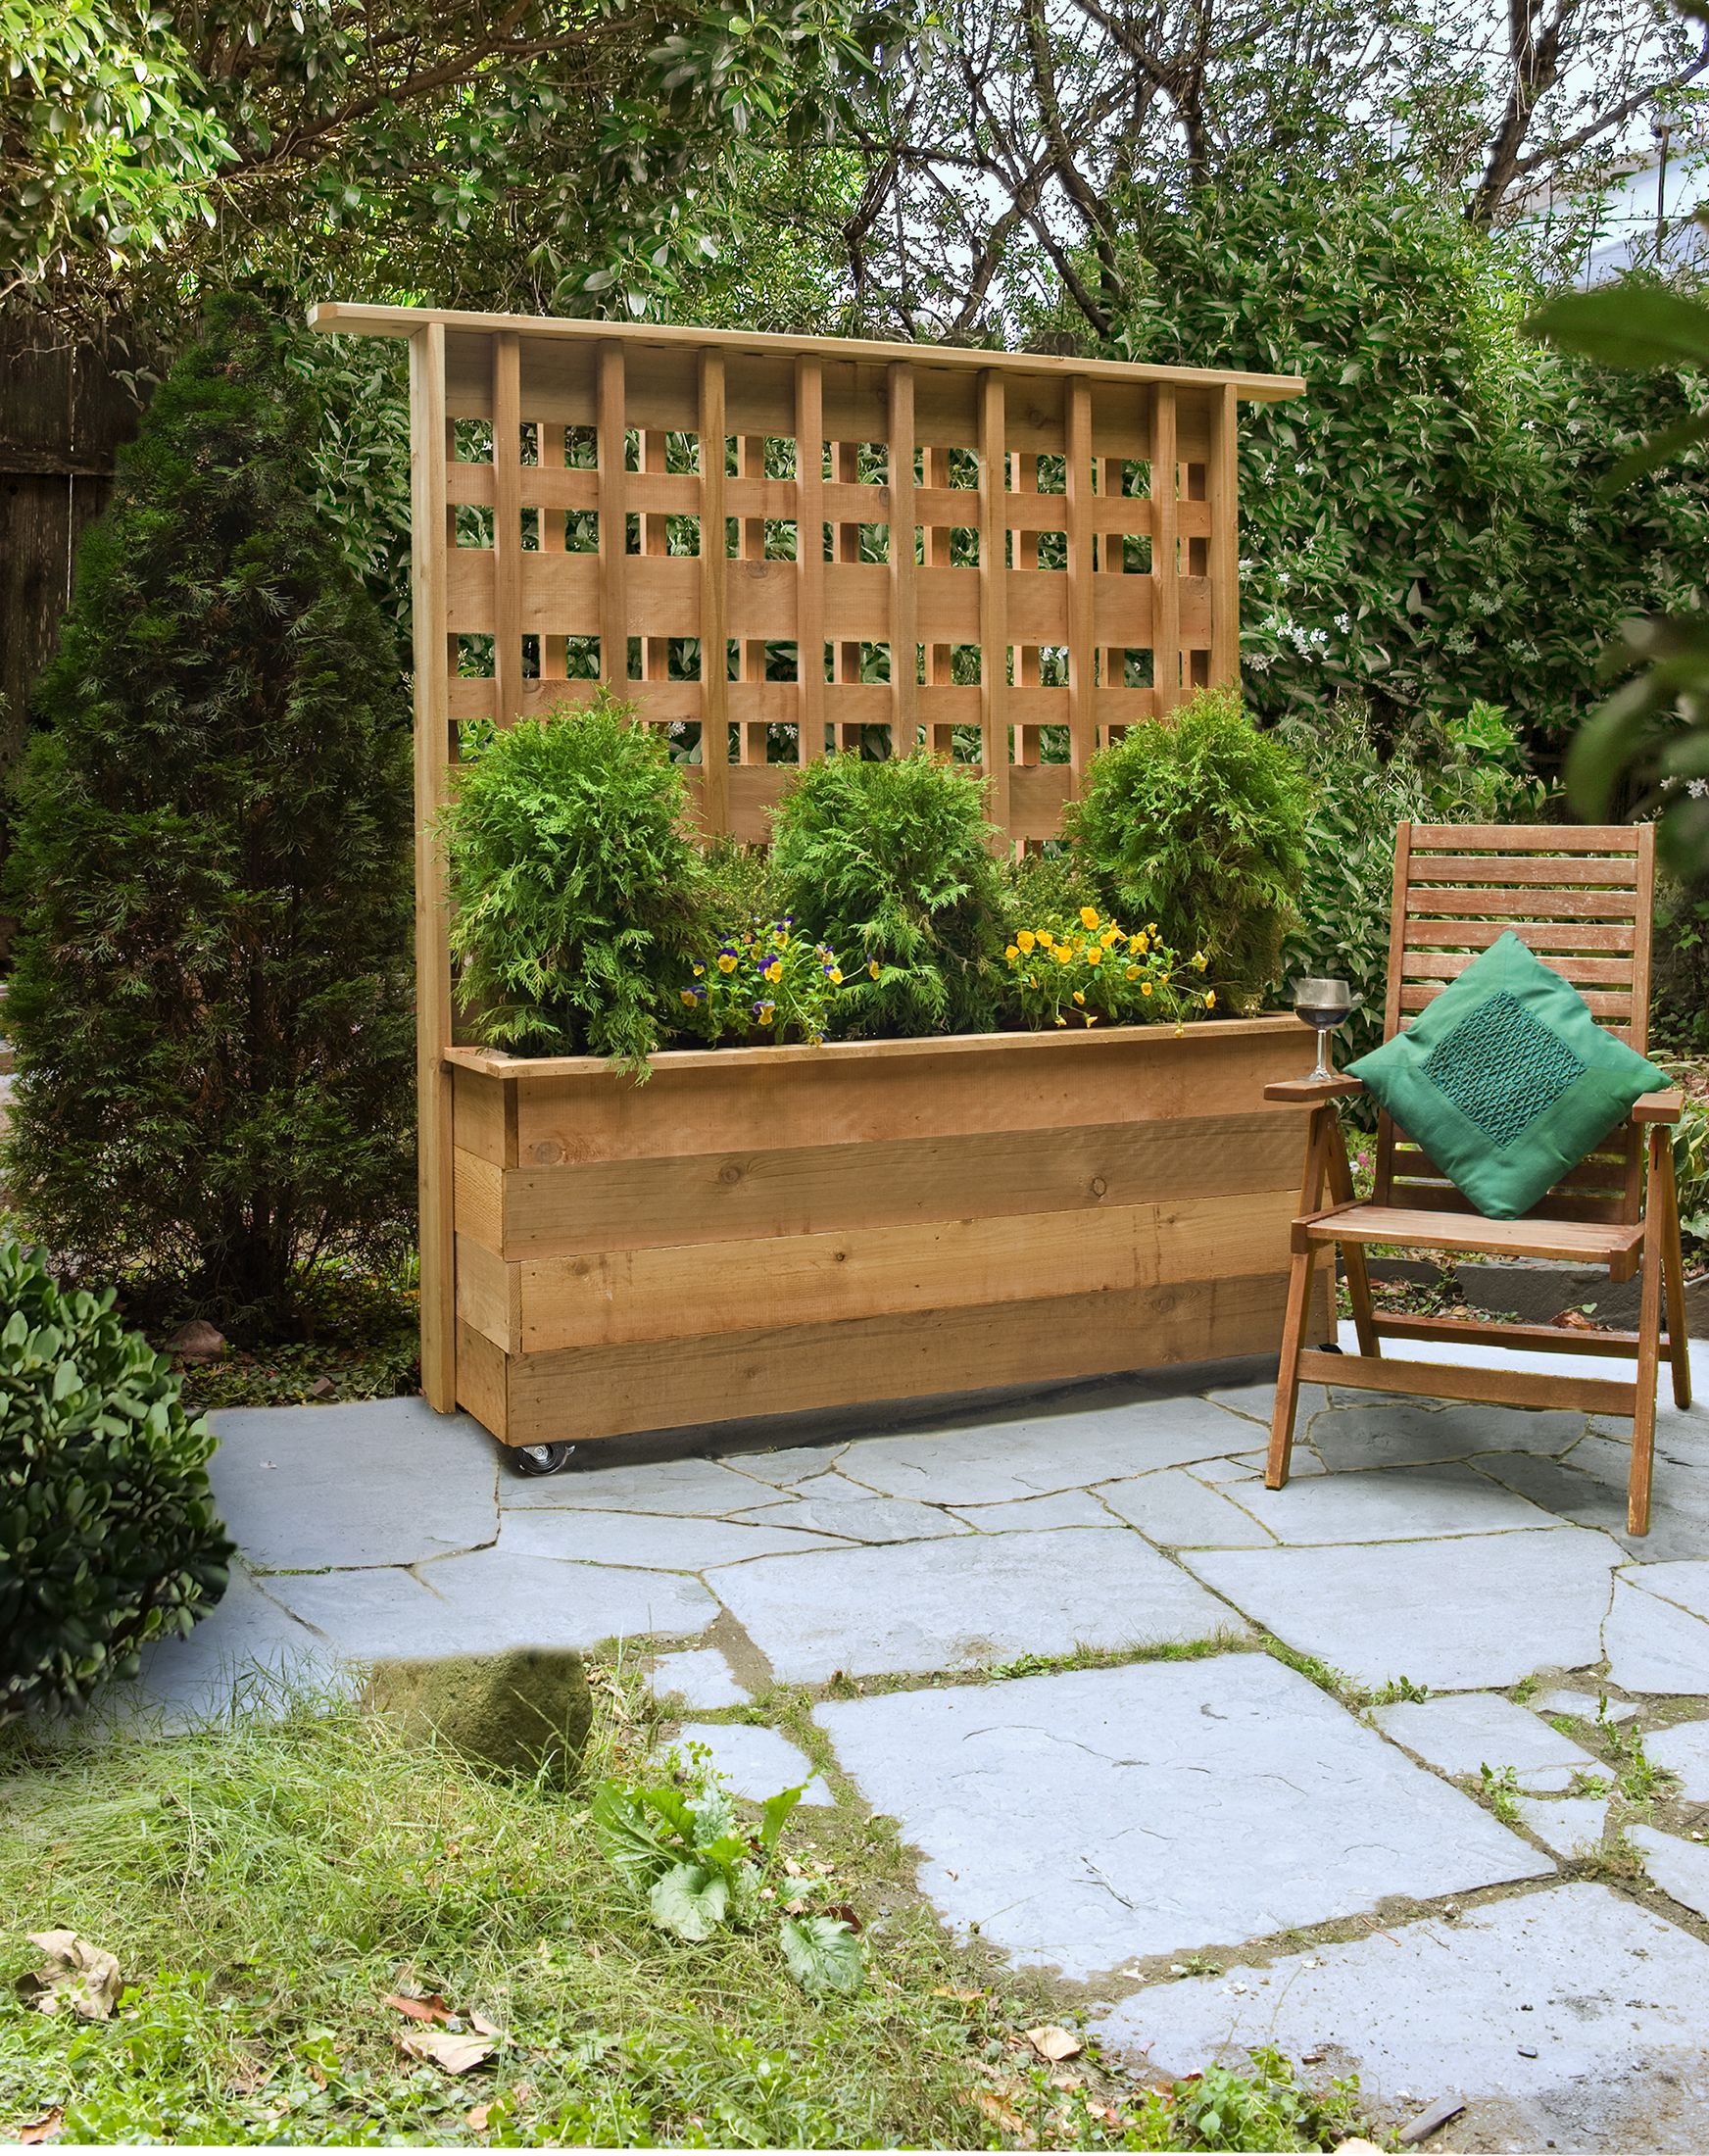 Planter Box With Trellis: A Beautiful Means to Privacy - This Old House